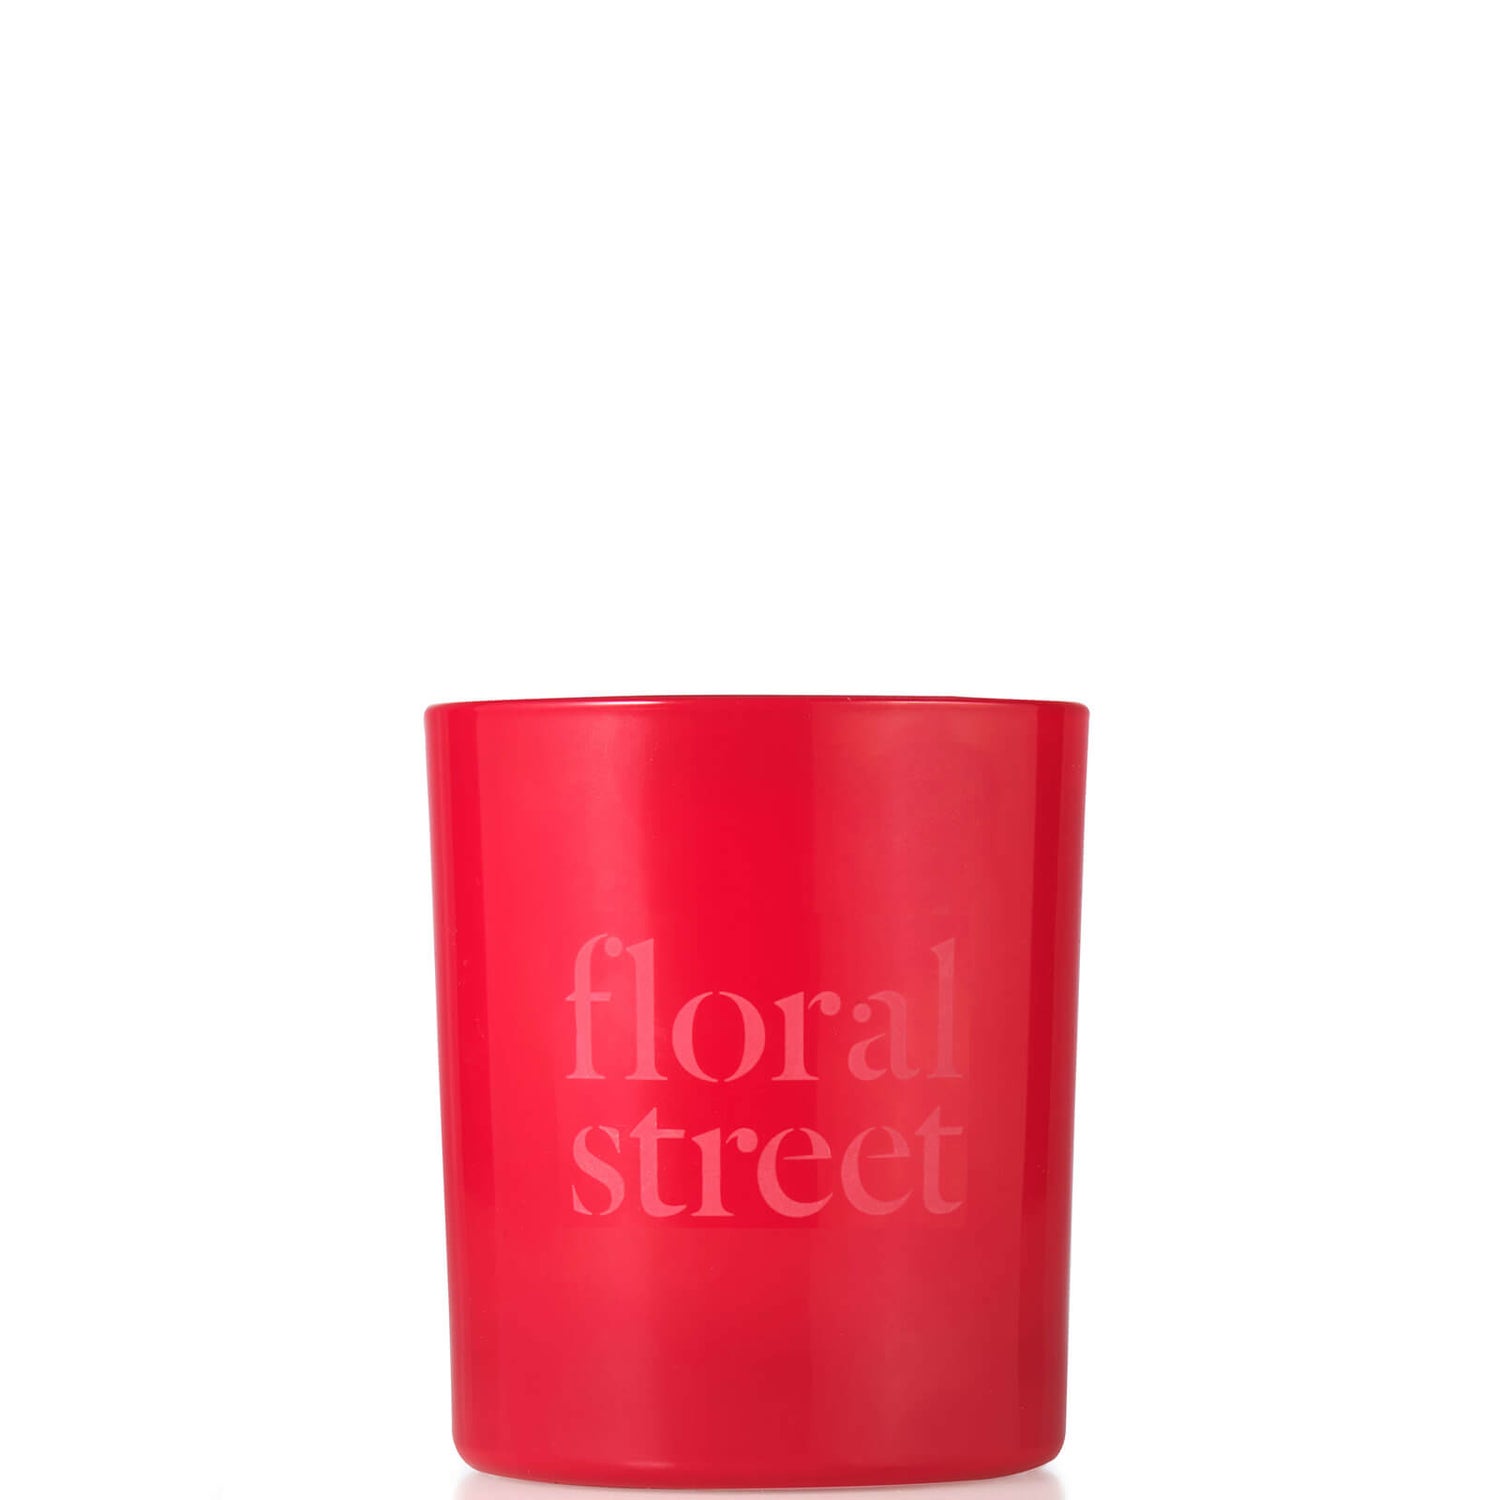 Floral Street Midnight Tulip Candle 200g